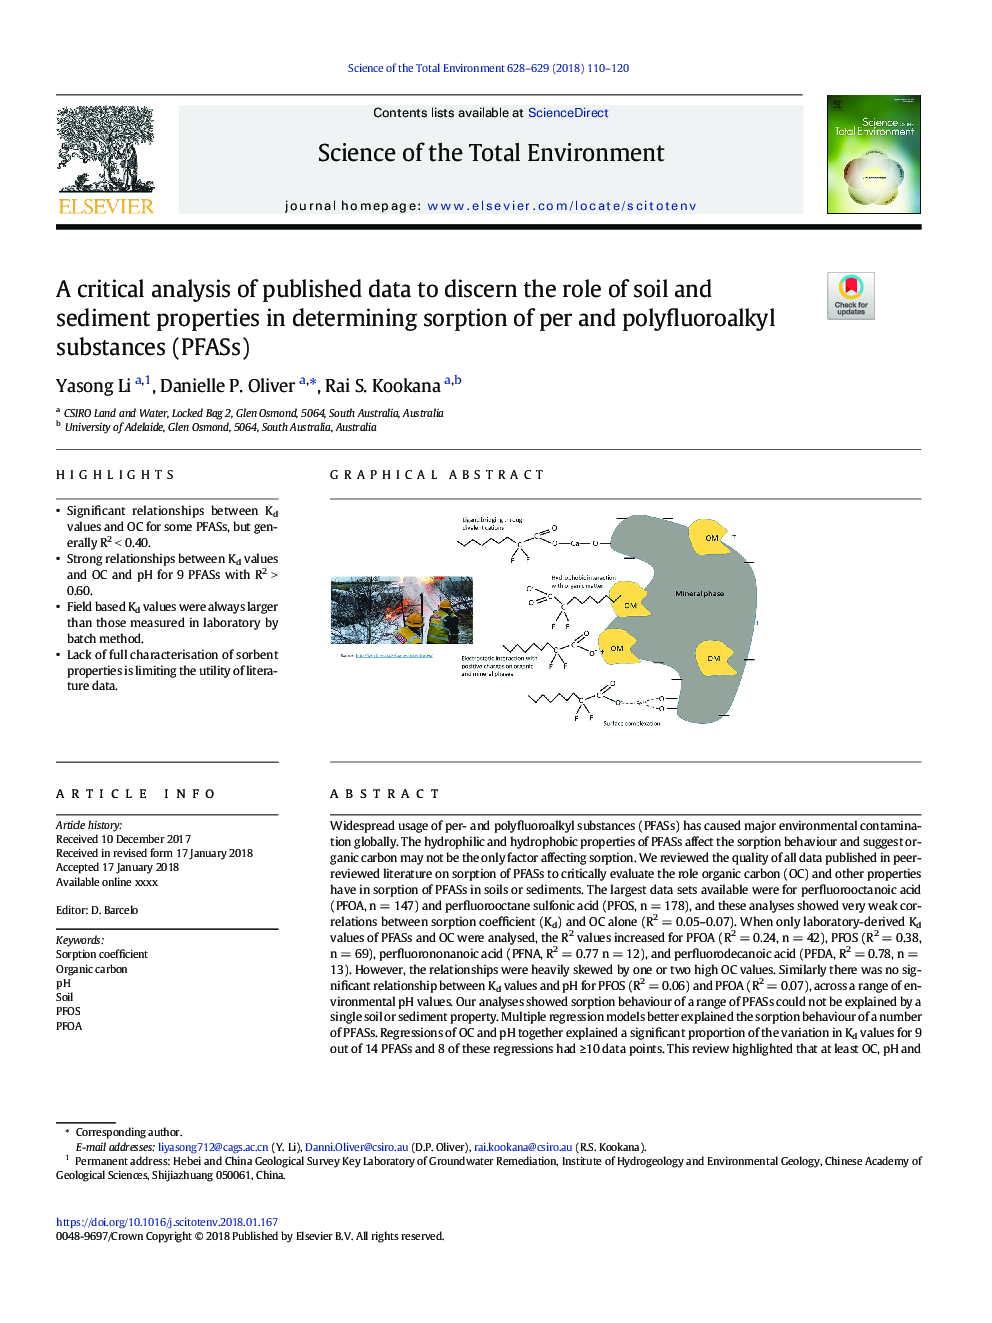 A critical analysis of published data to discern the role of soil and sediment properties in determining sorption of per and polyfluoroalkyl substances (PFASs)